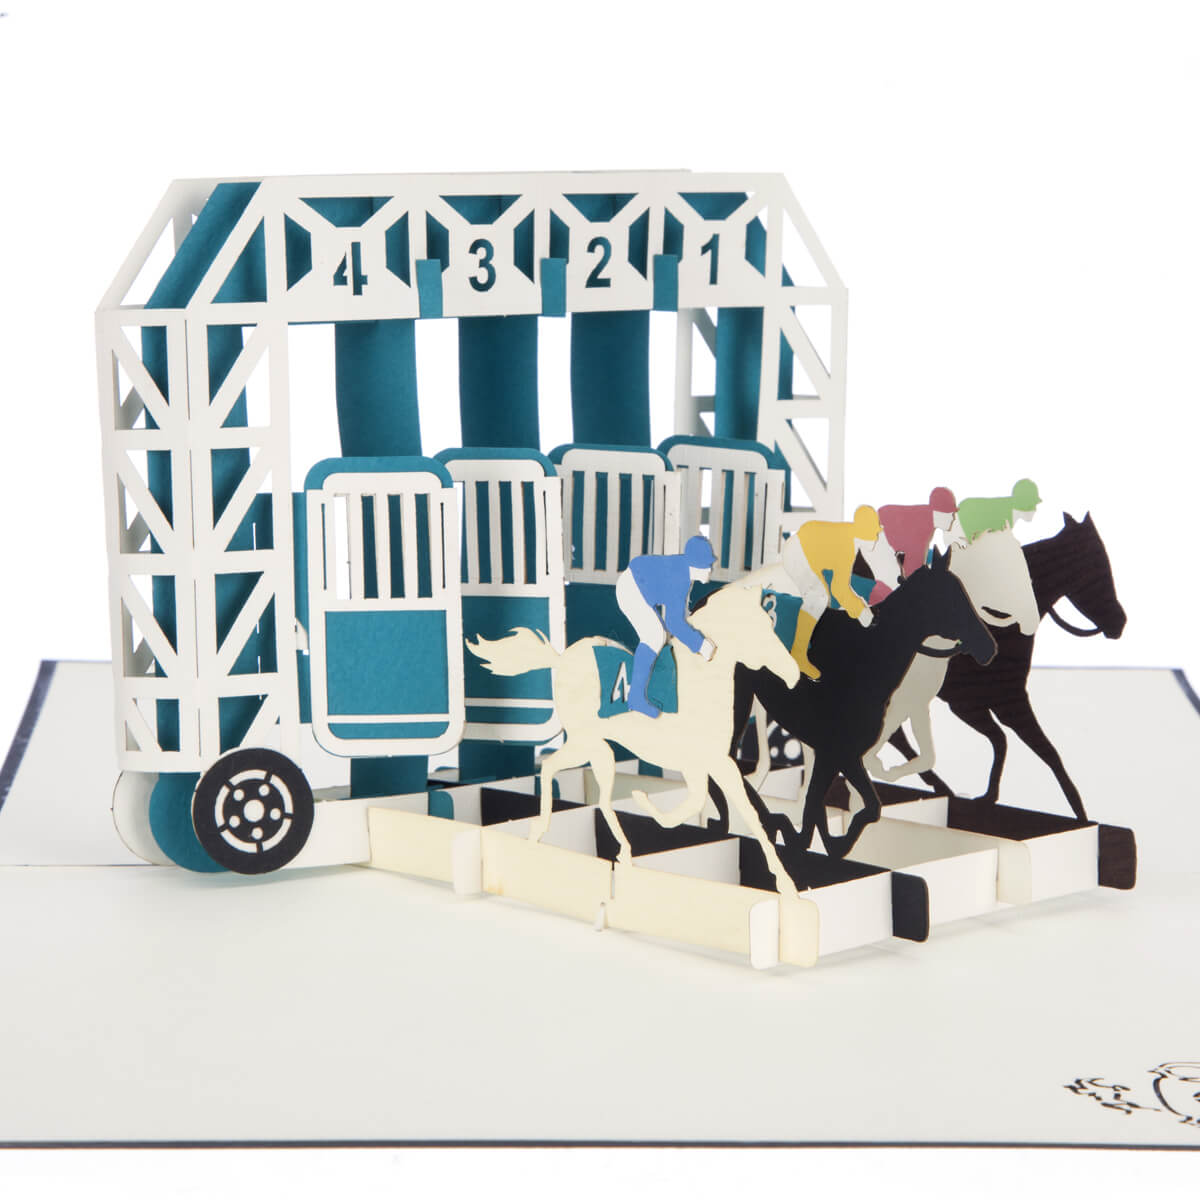 close up image of Horse Racing Pop Up Card featuring 4 horses racing out of stalls